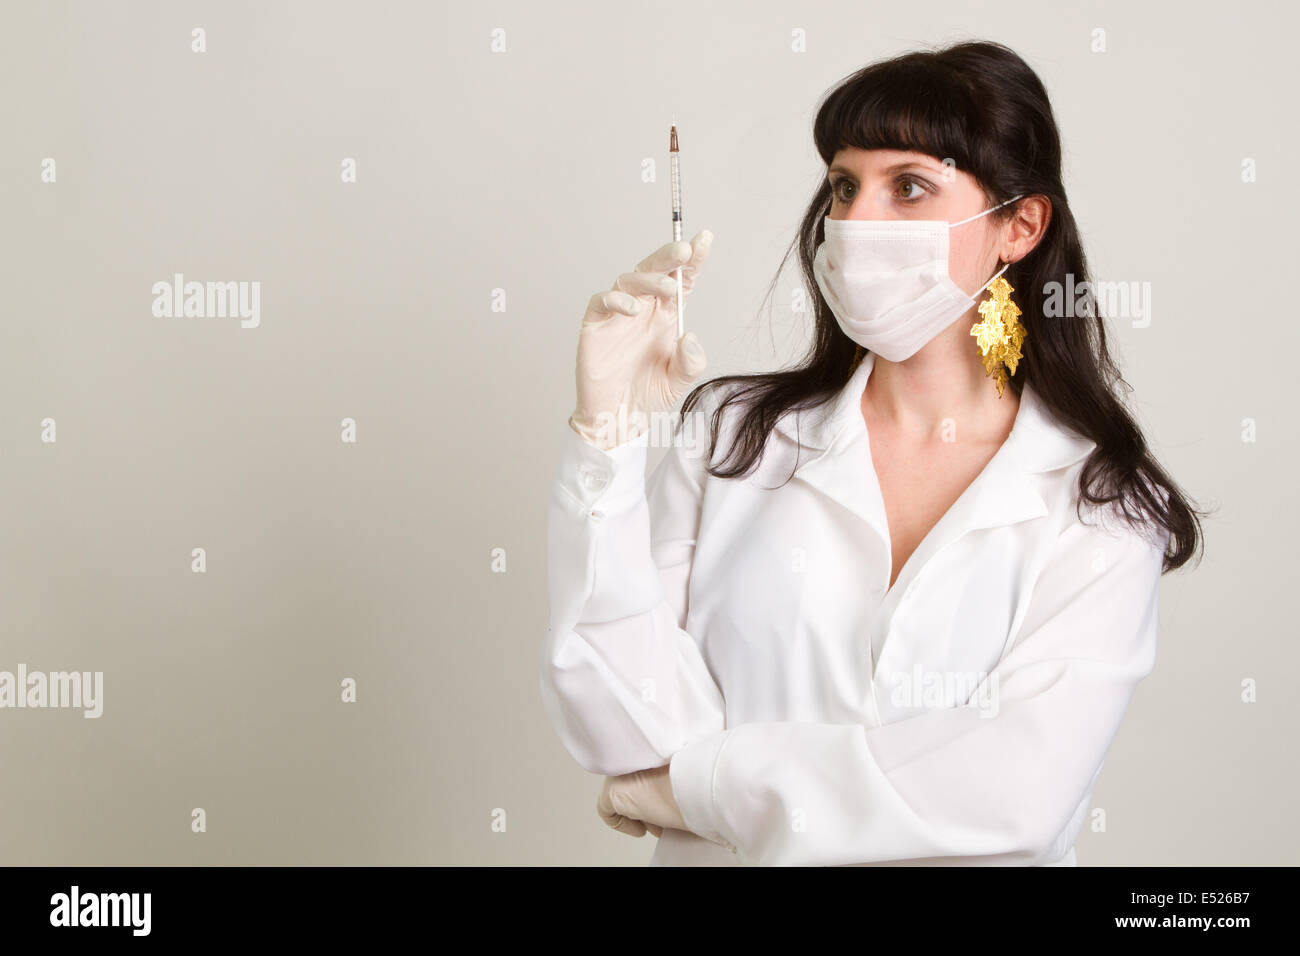 doctor  in gloves showing ampule Stock Photo